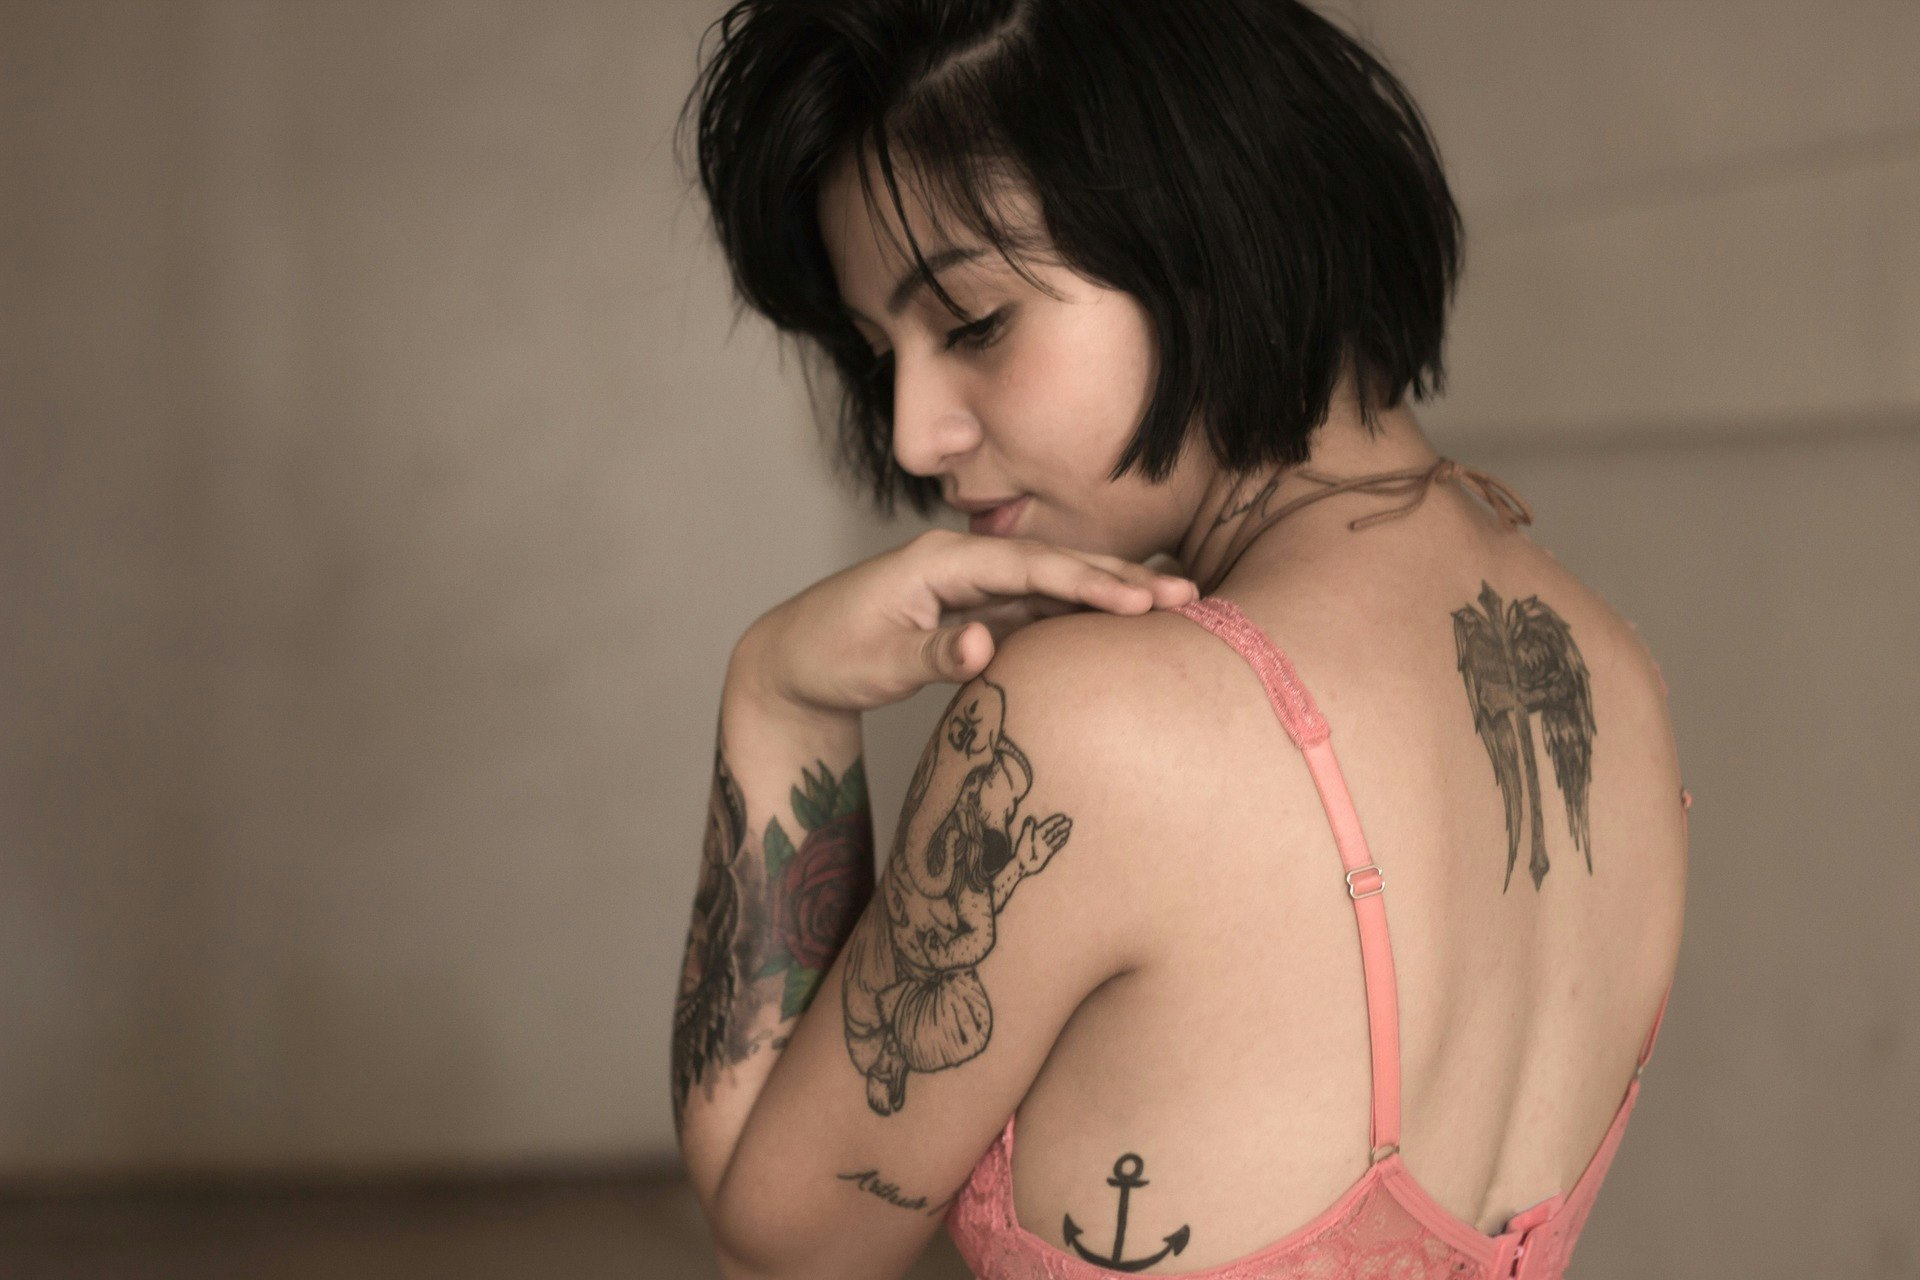 10 Powerful Reasons People Have Gotten Tattoos